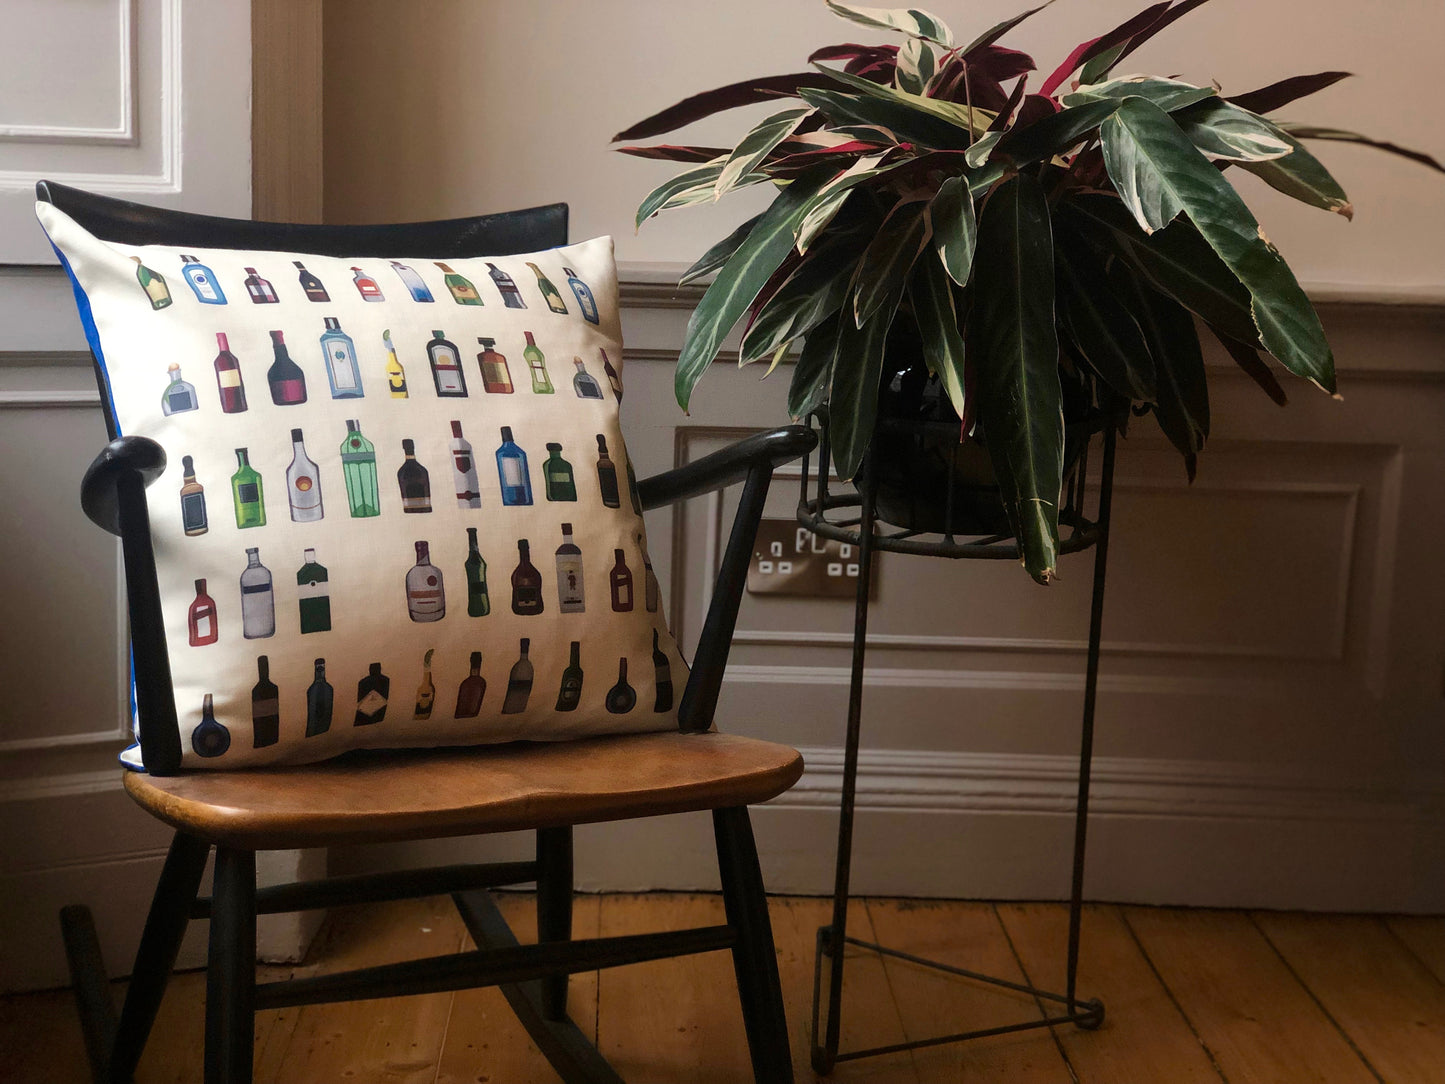 Alcohol bottle inspired cushion on chair 